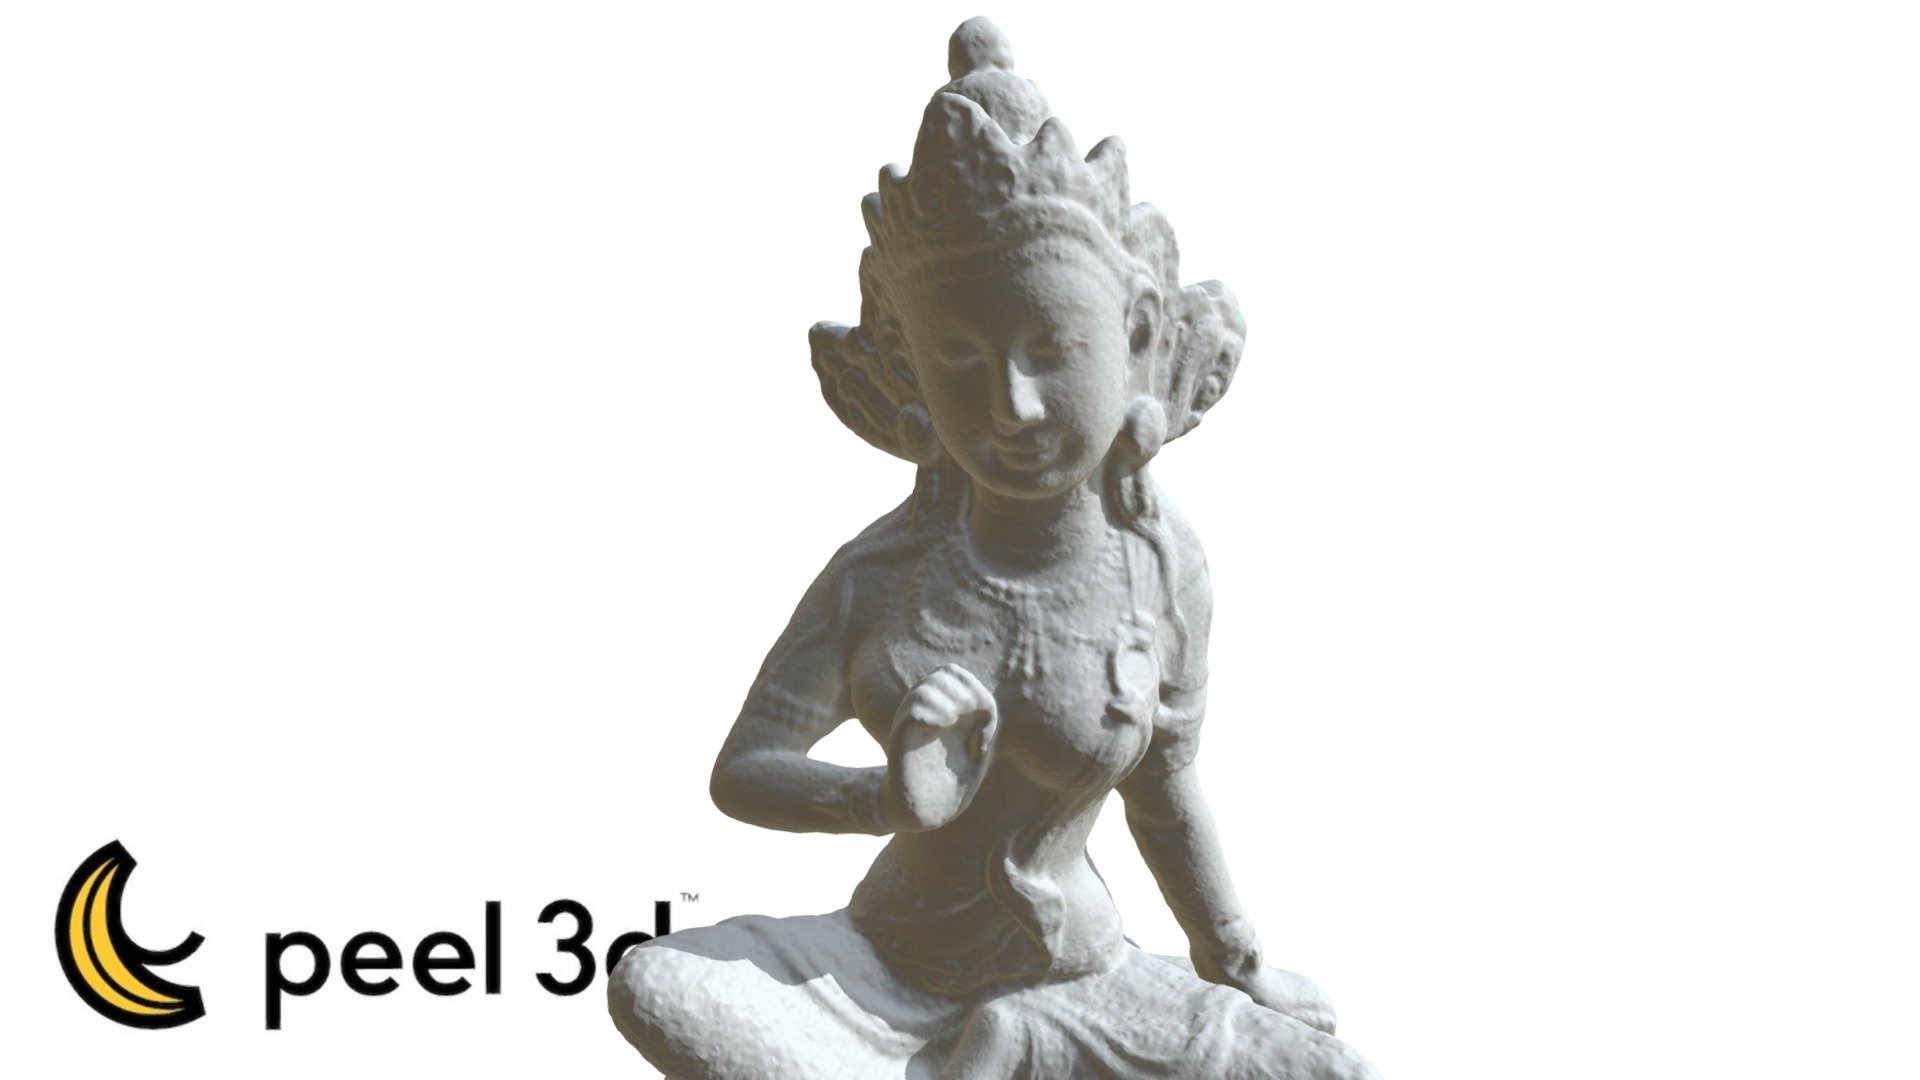 Small size statue scanned with peel 3d